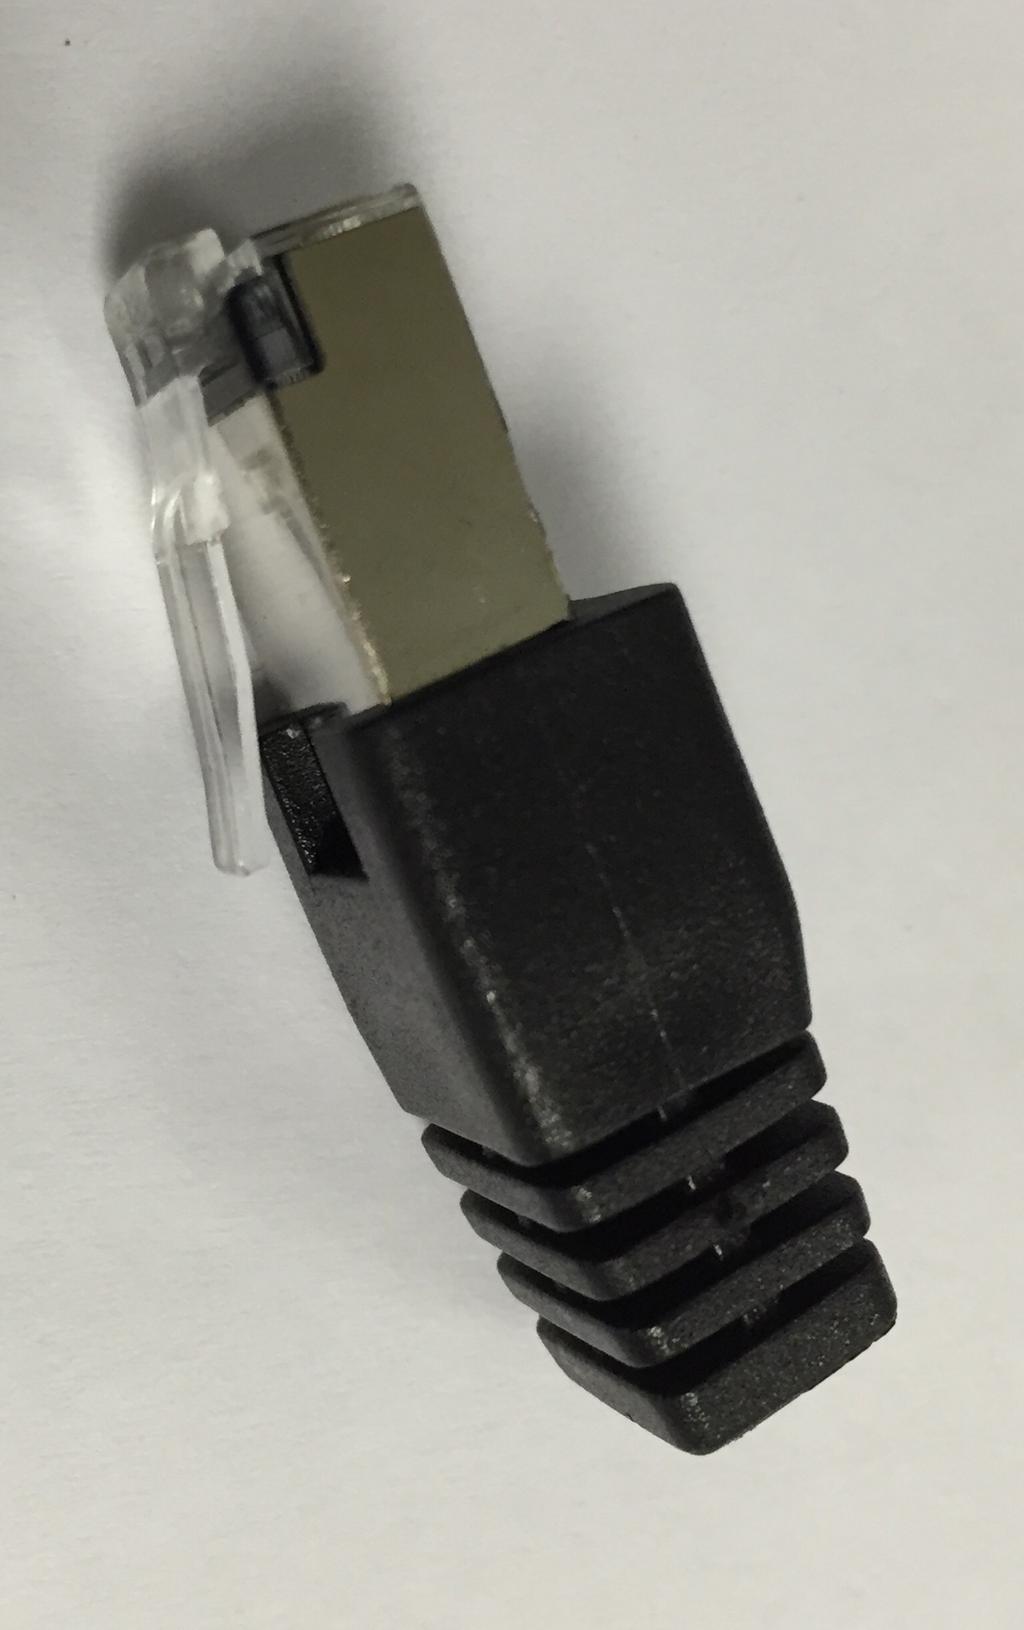 STEP THREE: Place the termination connector to the socket labeled "Internal" patch (Intern).